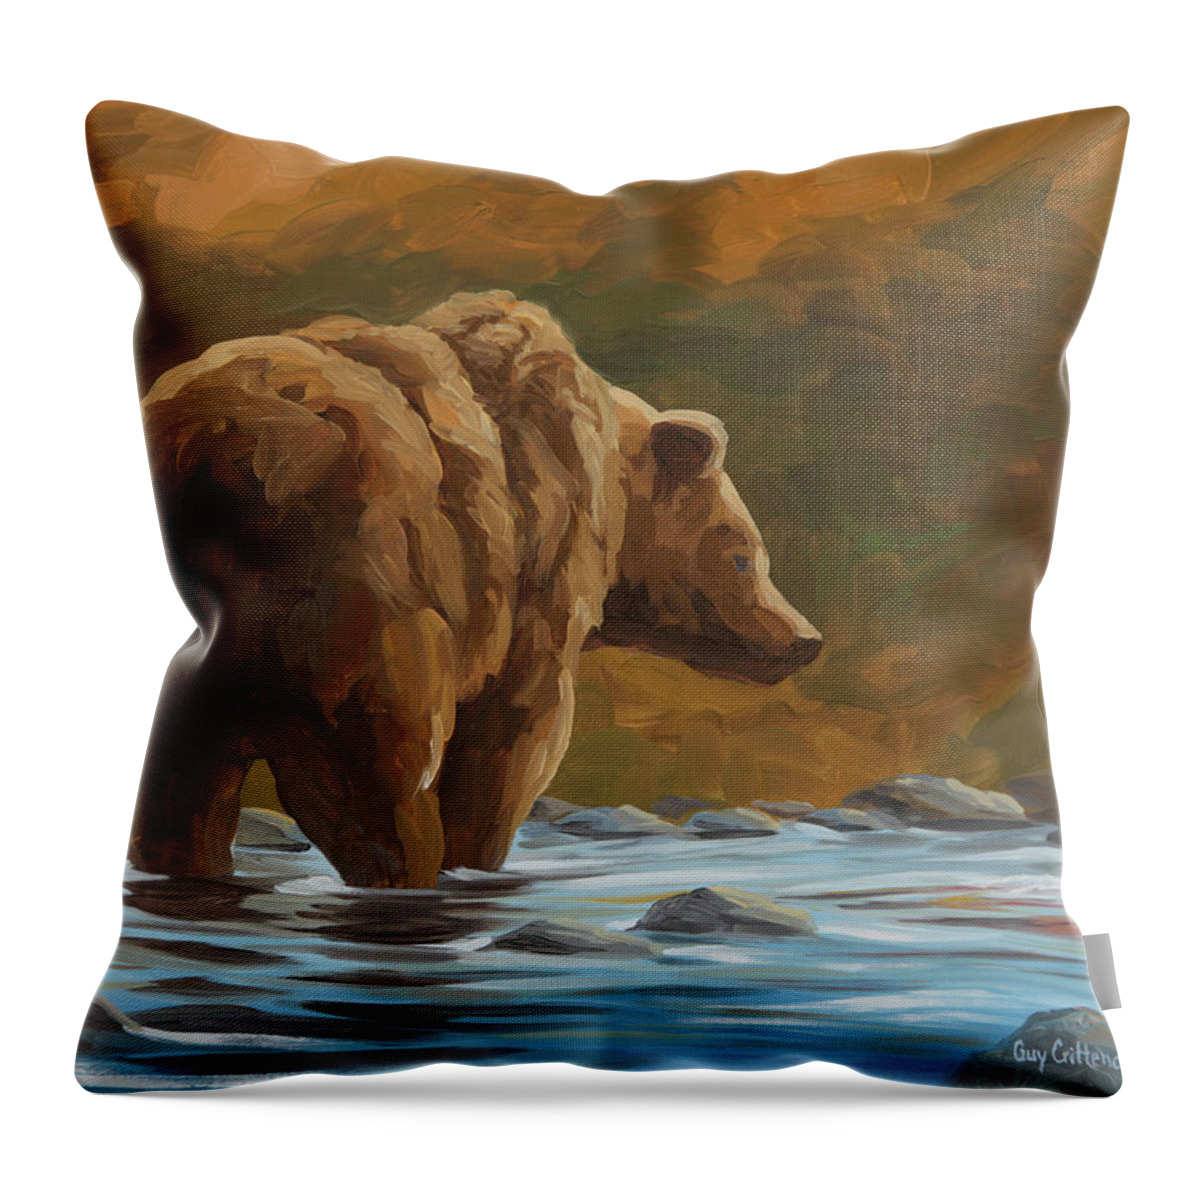 Grizzly Bear Throw Pillow featuring the painting Salmon Run by Guy Crittenden